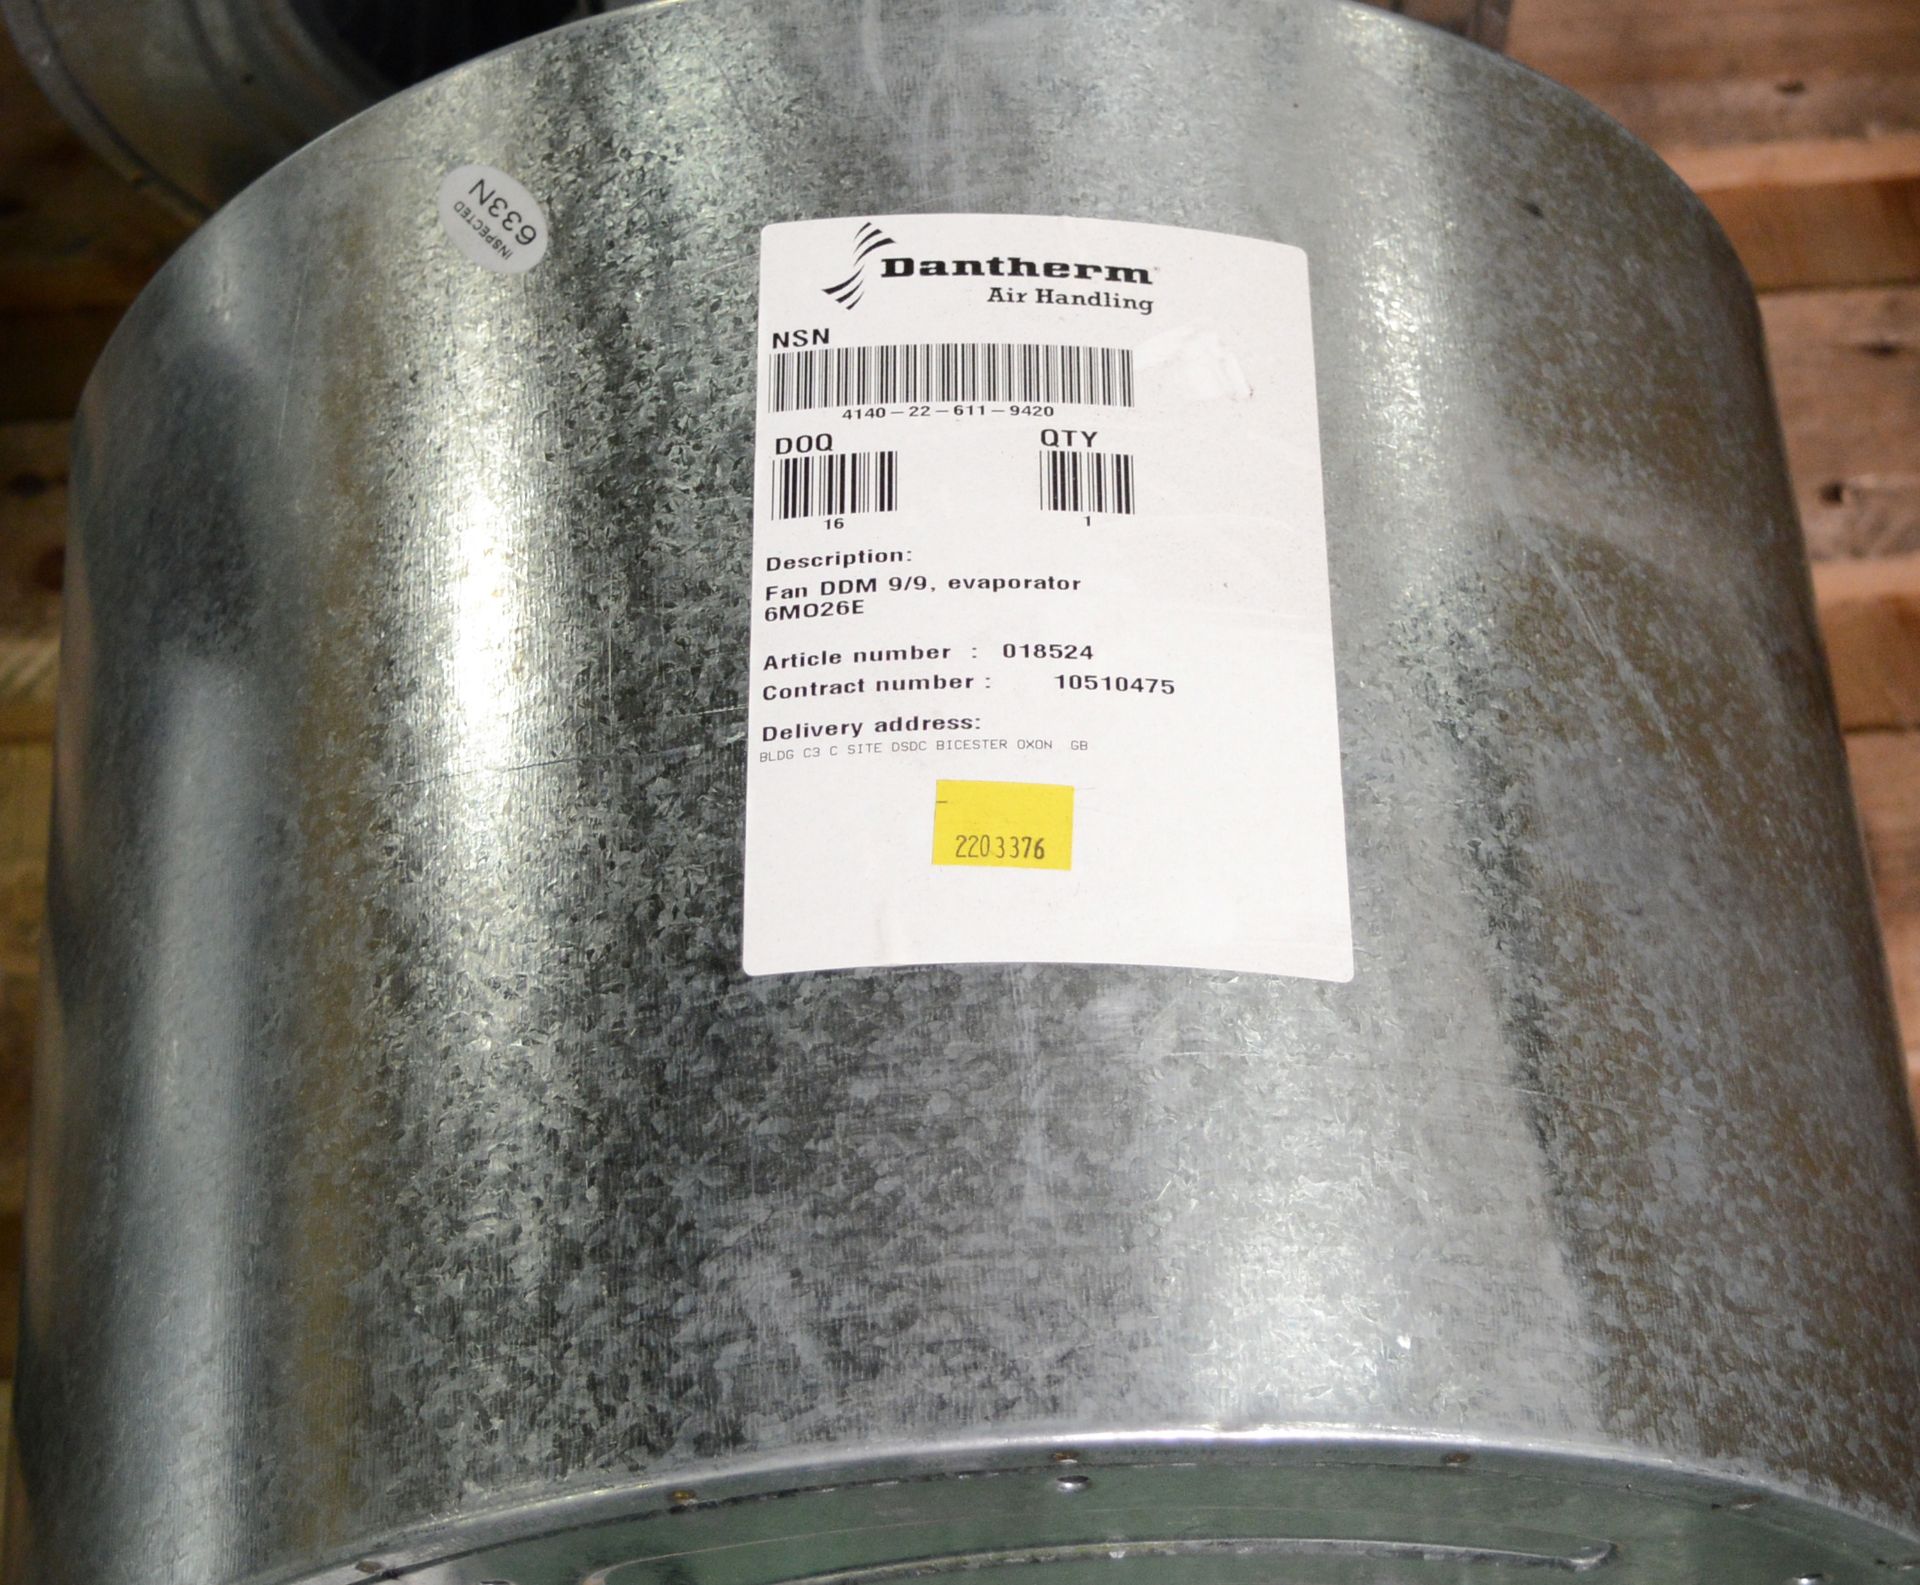 4x Dantherm DDm 9/9 Centrifugal Fans. - Image 2 of 2